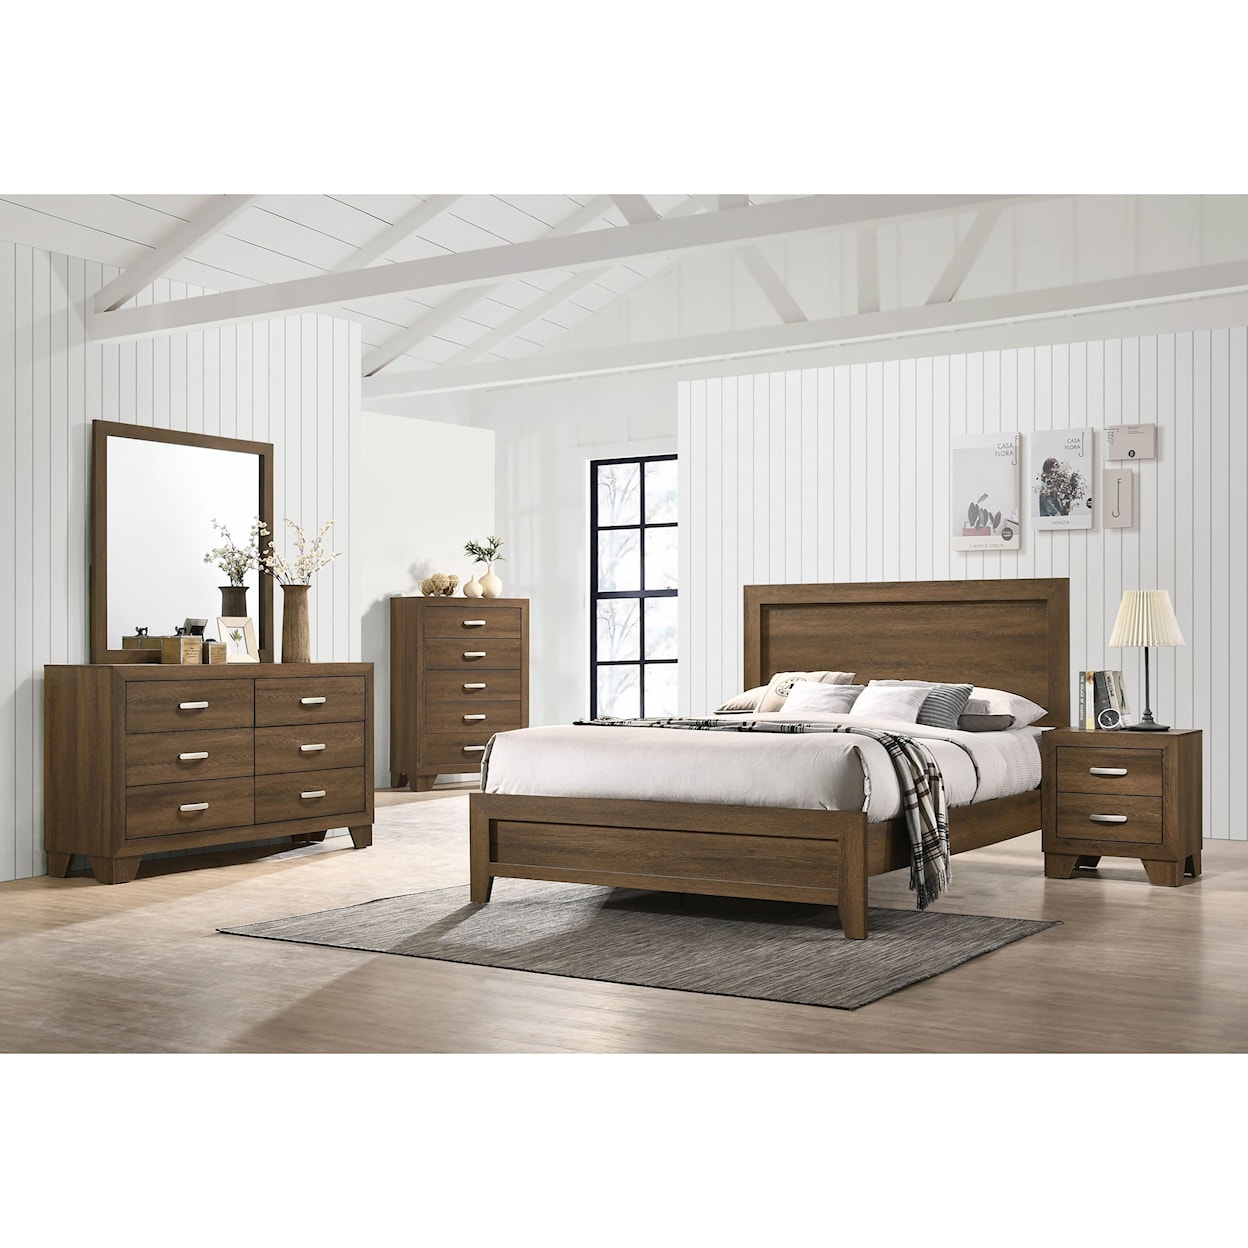 Acme Furniture Miquell King Bedroom Group